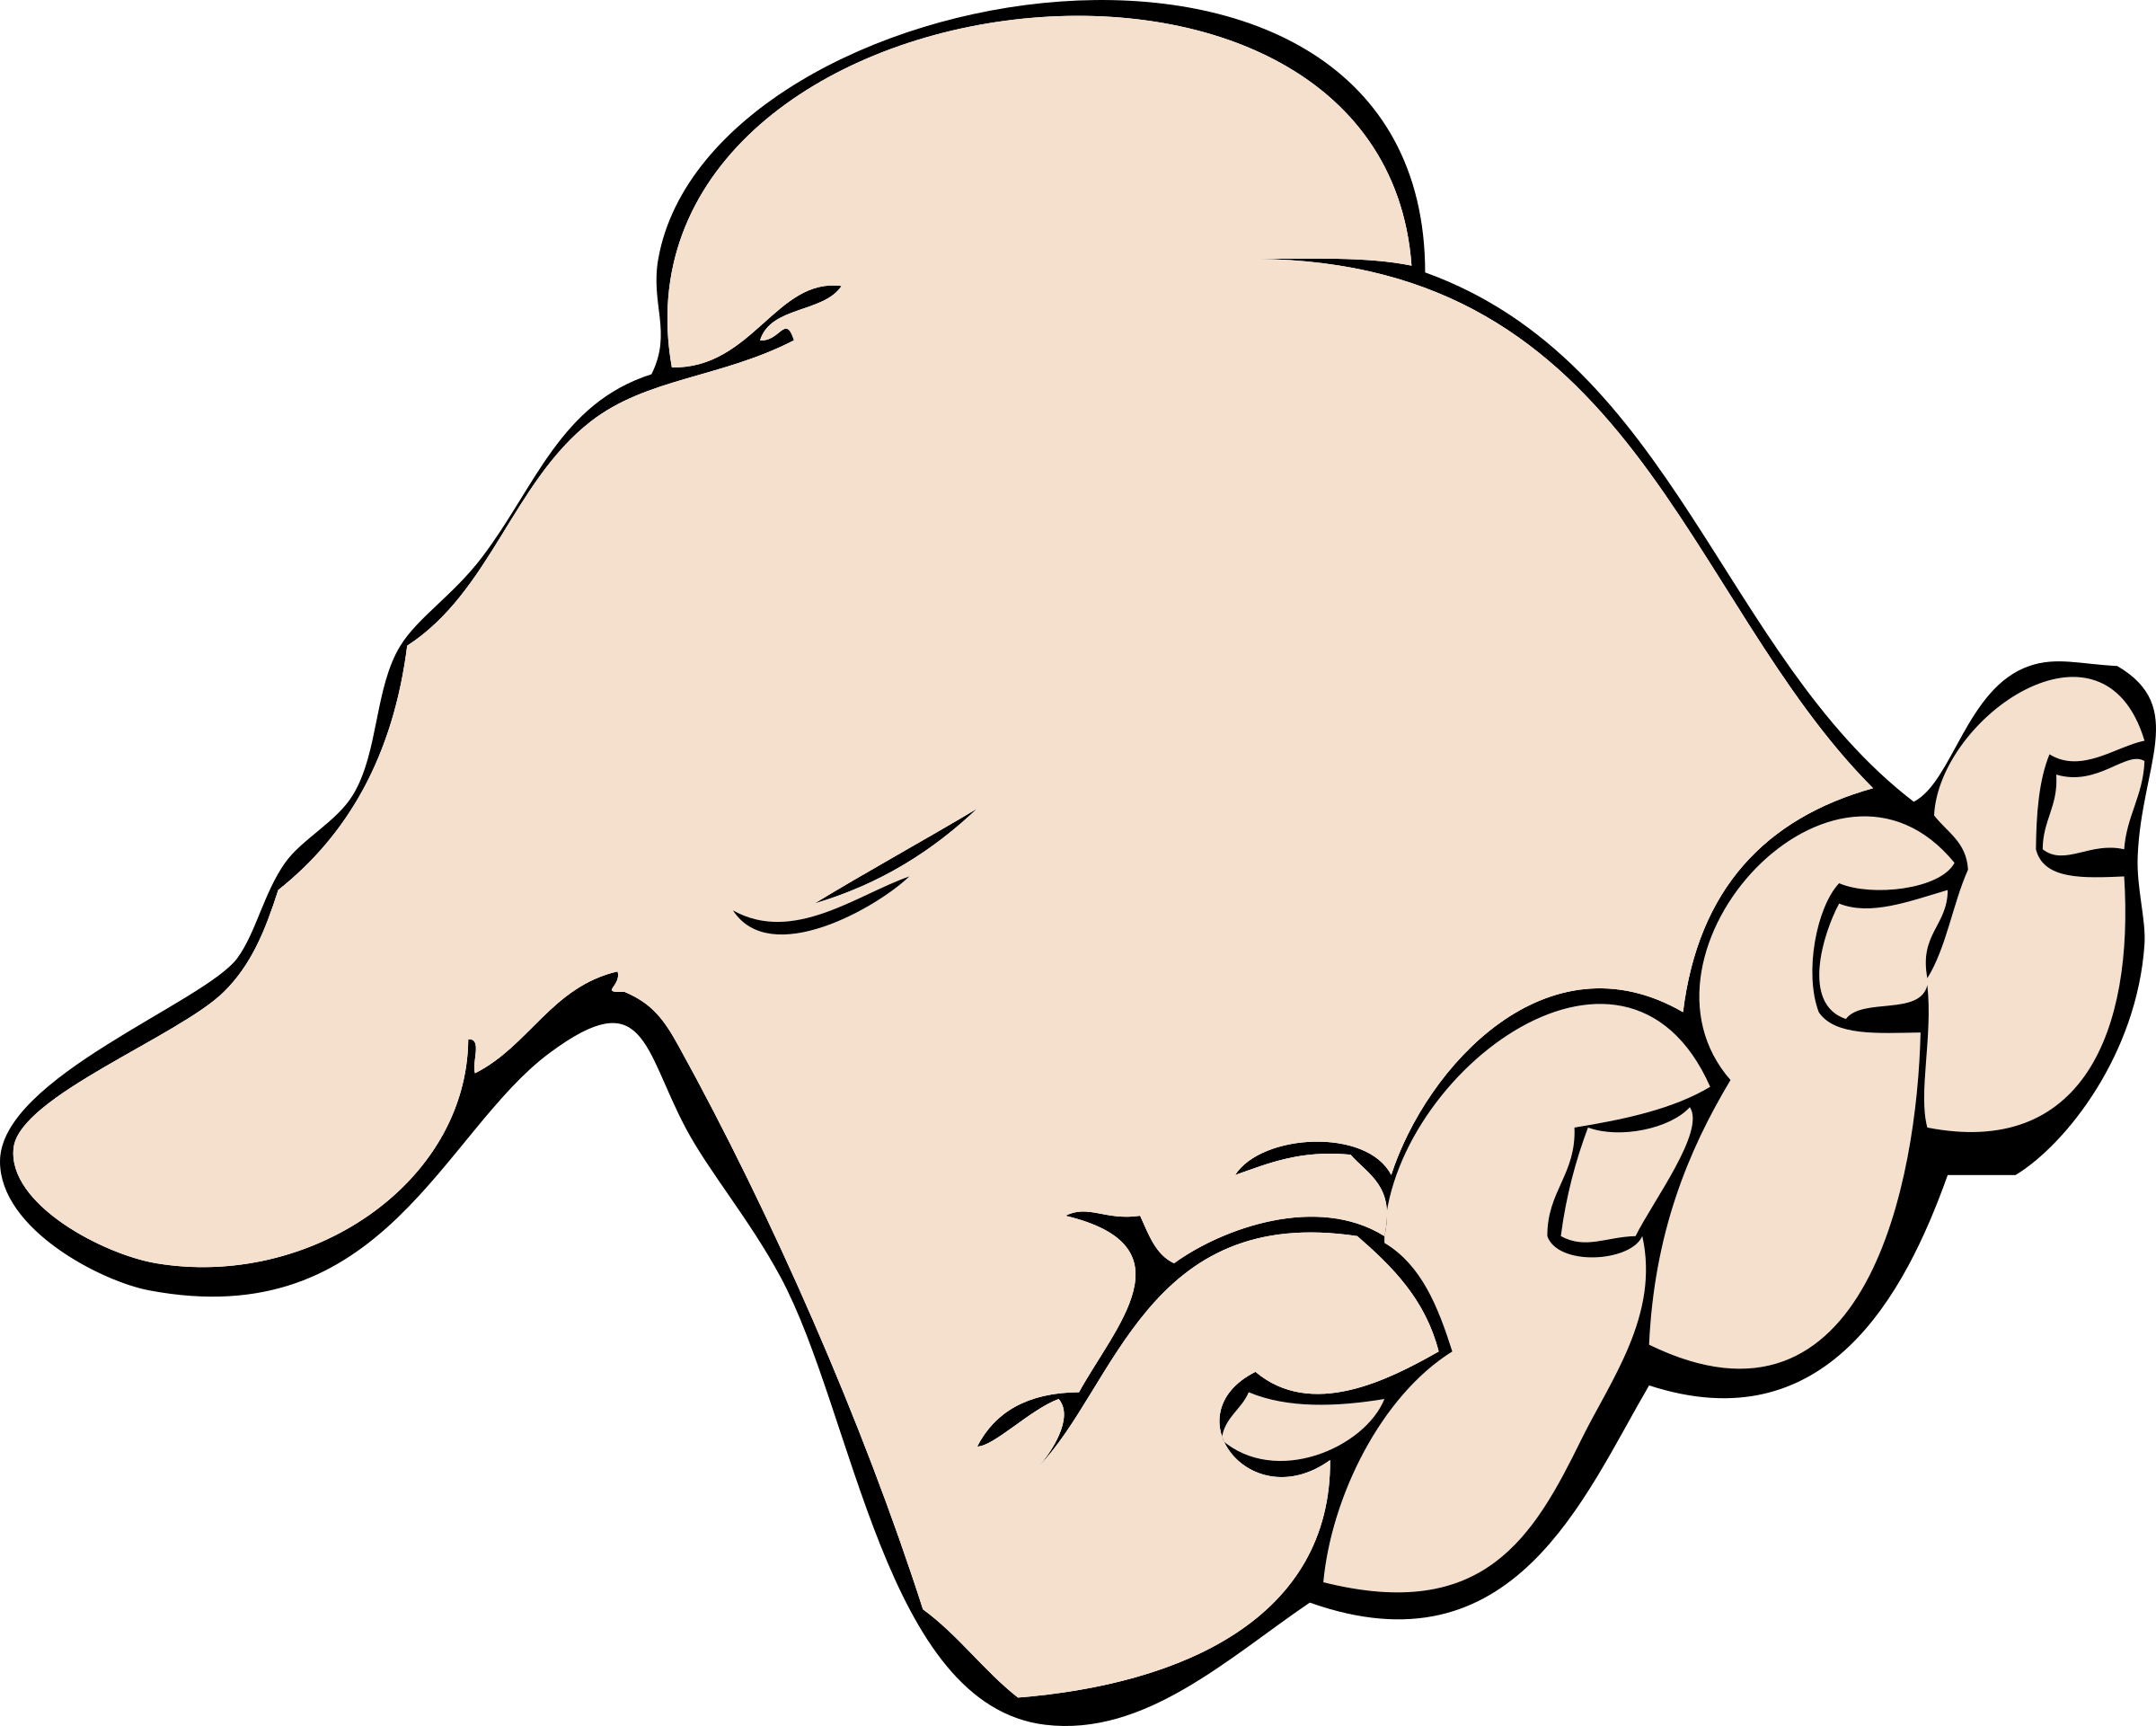 Begging Hands Clipart Motions